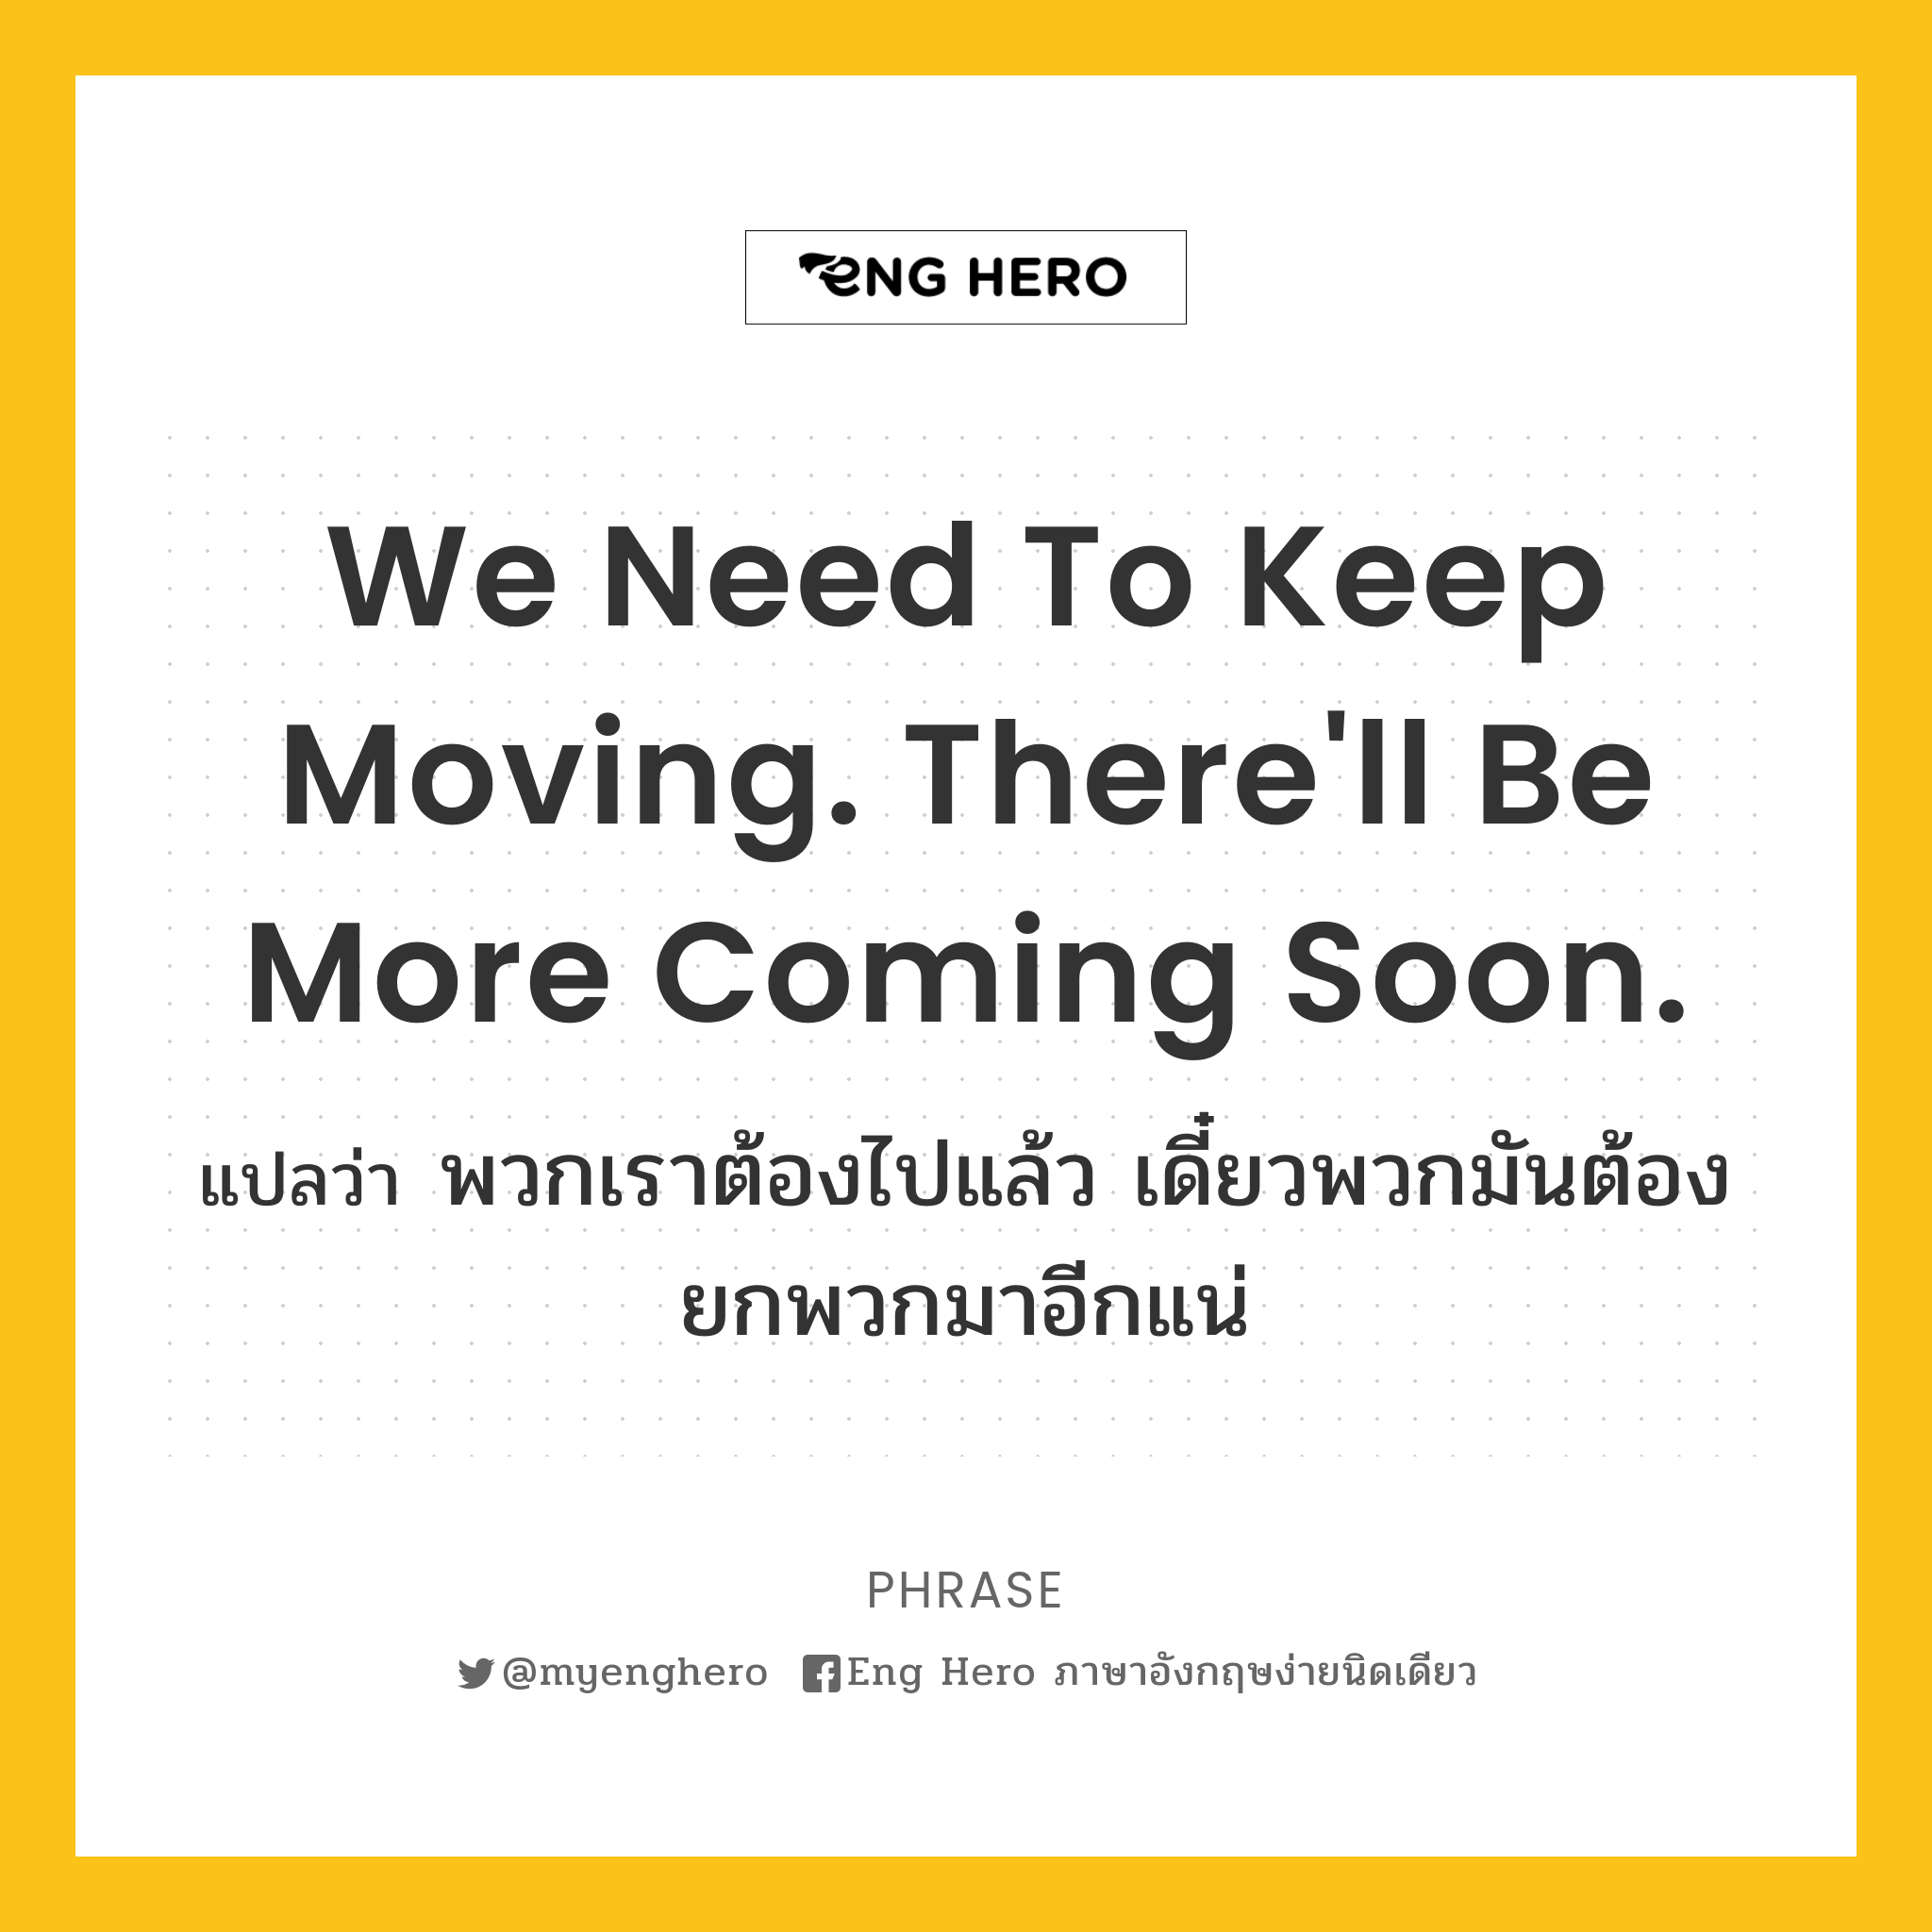 We need to keep moving. There'll be more coming soon.